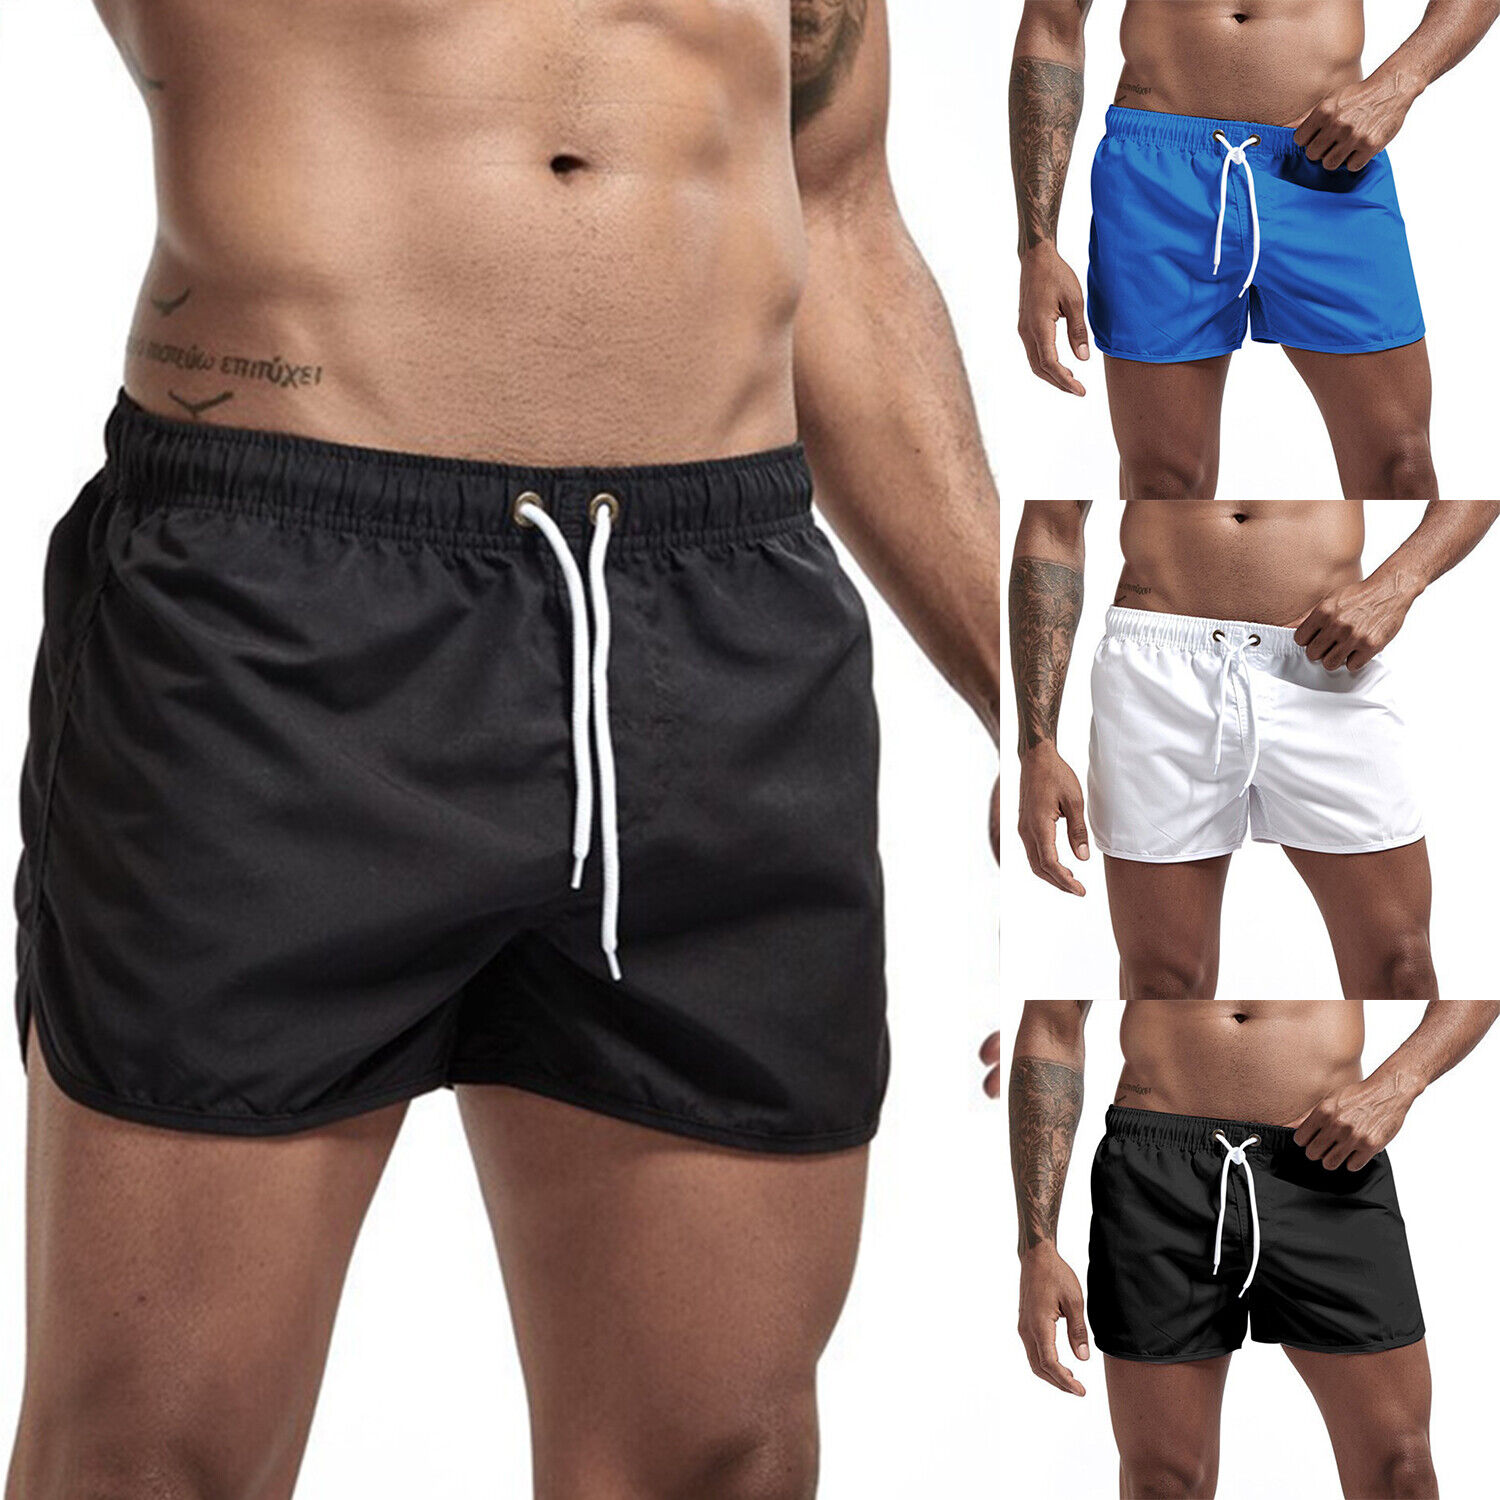 Mens Training Shorts Gym Workout Sports Running Sweatpants Fitness ...